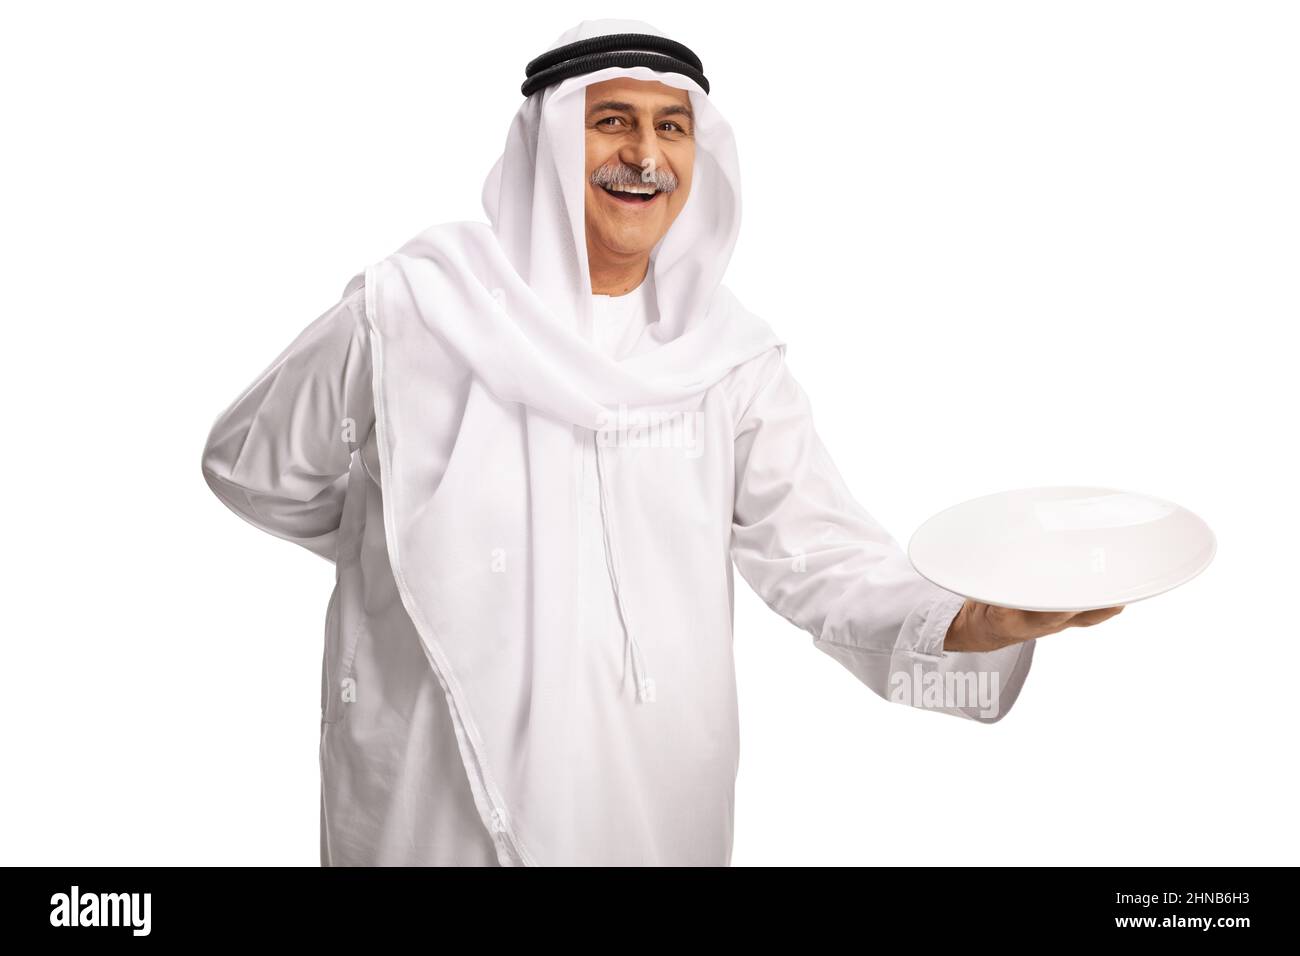 Mature arab man holding an empty plate and smiling isolated on white background Stock Photo